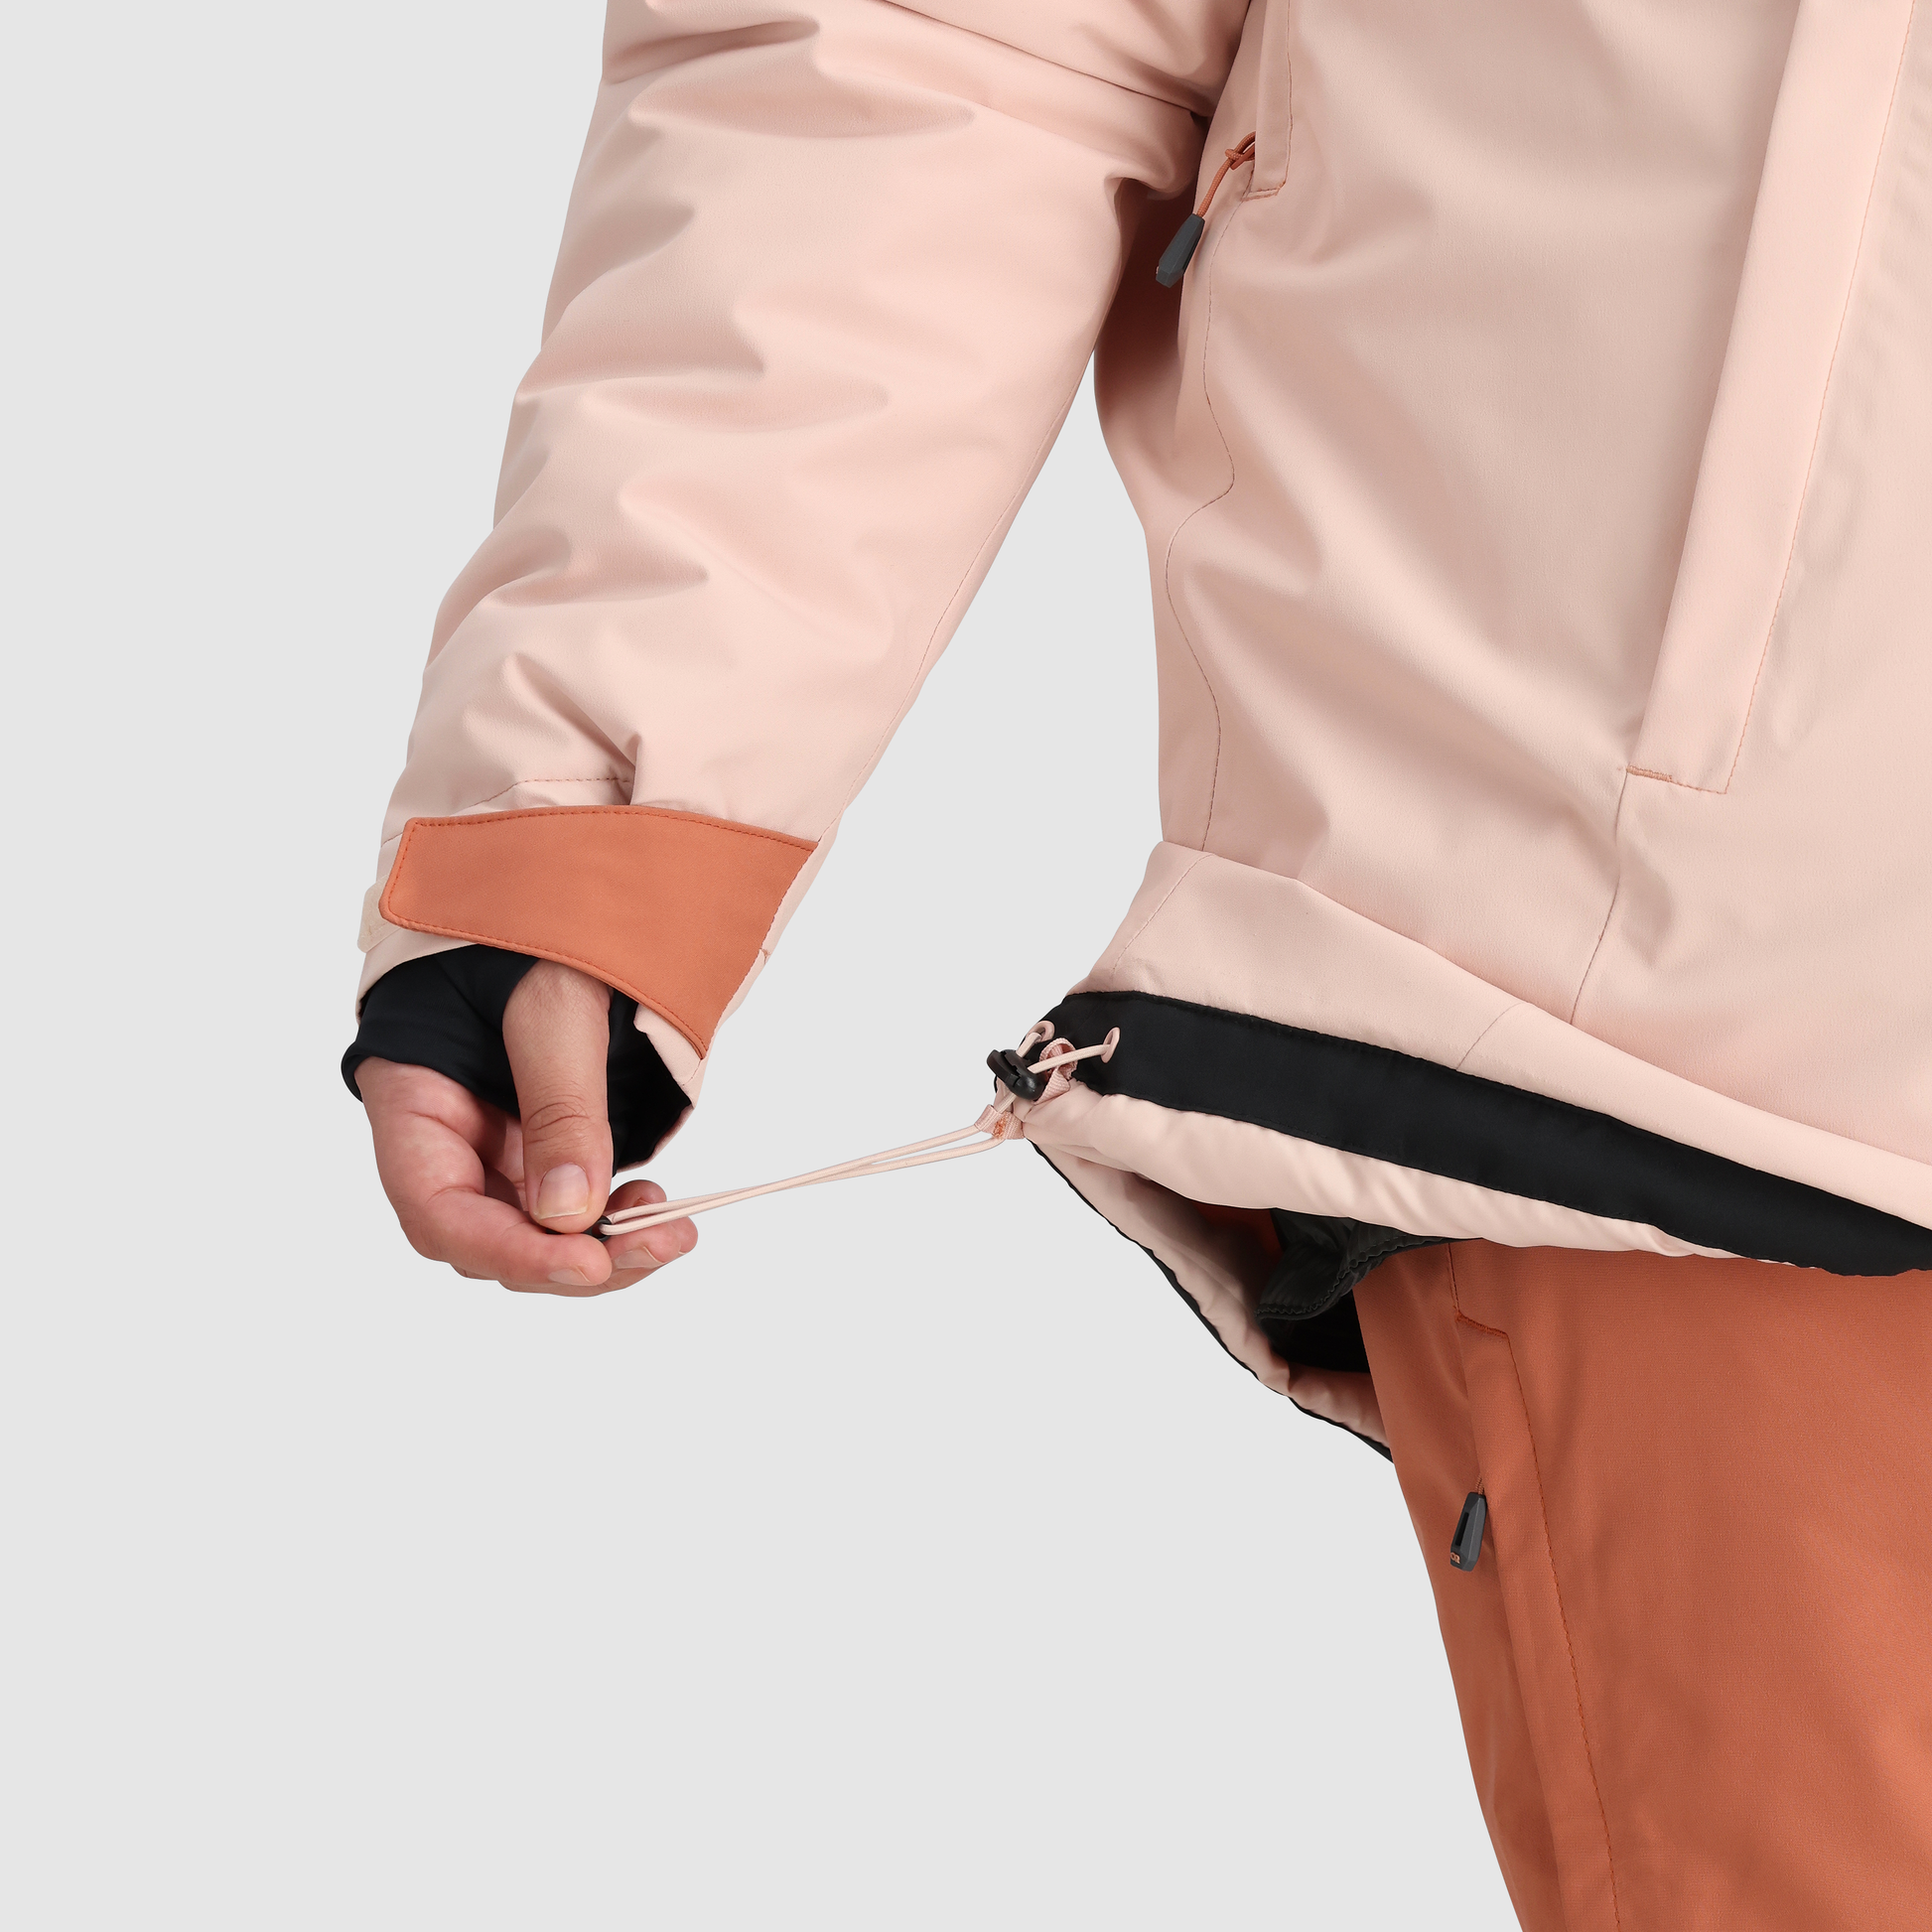 B9 :: Adjustable Drawcord Hem / Stash your gloves, electronics, and other valuables in these hidden pockets to keep them warm and close at hand.